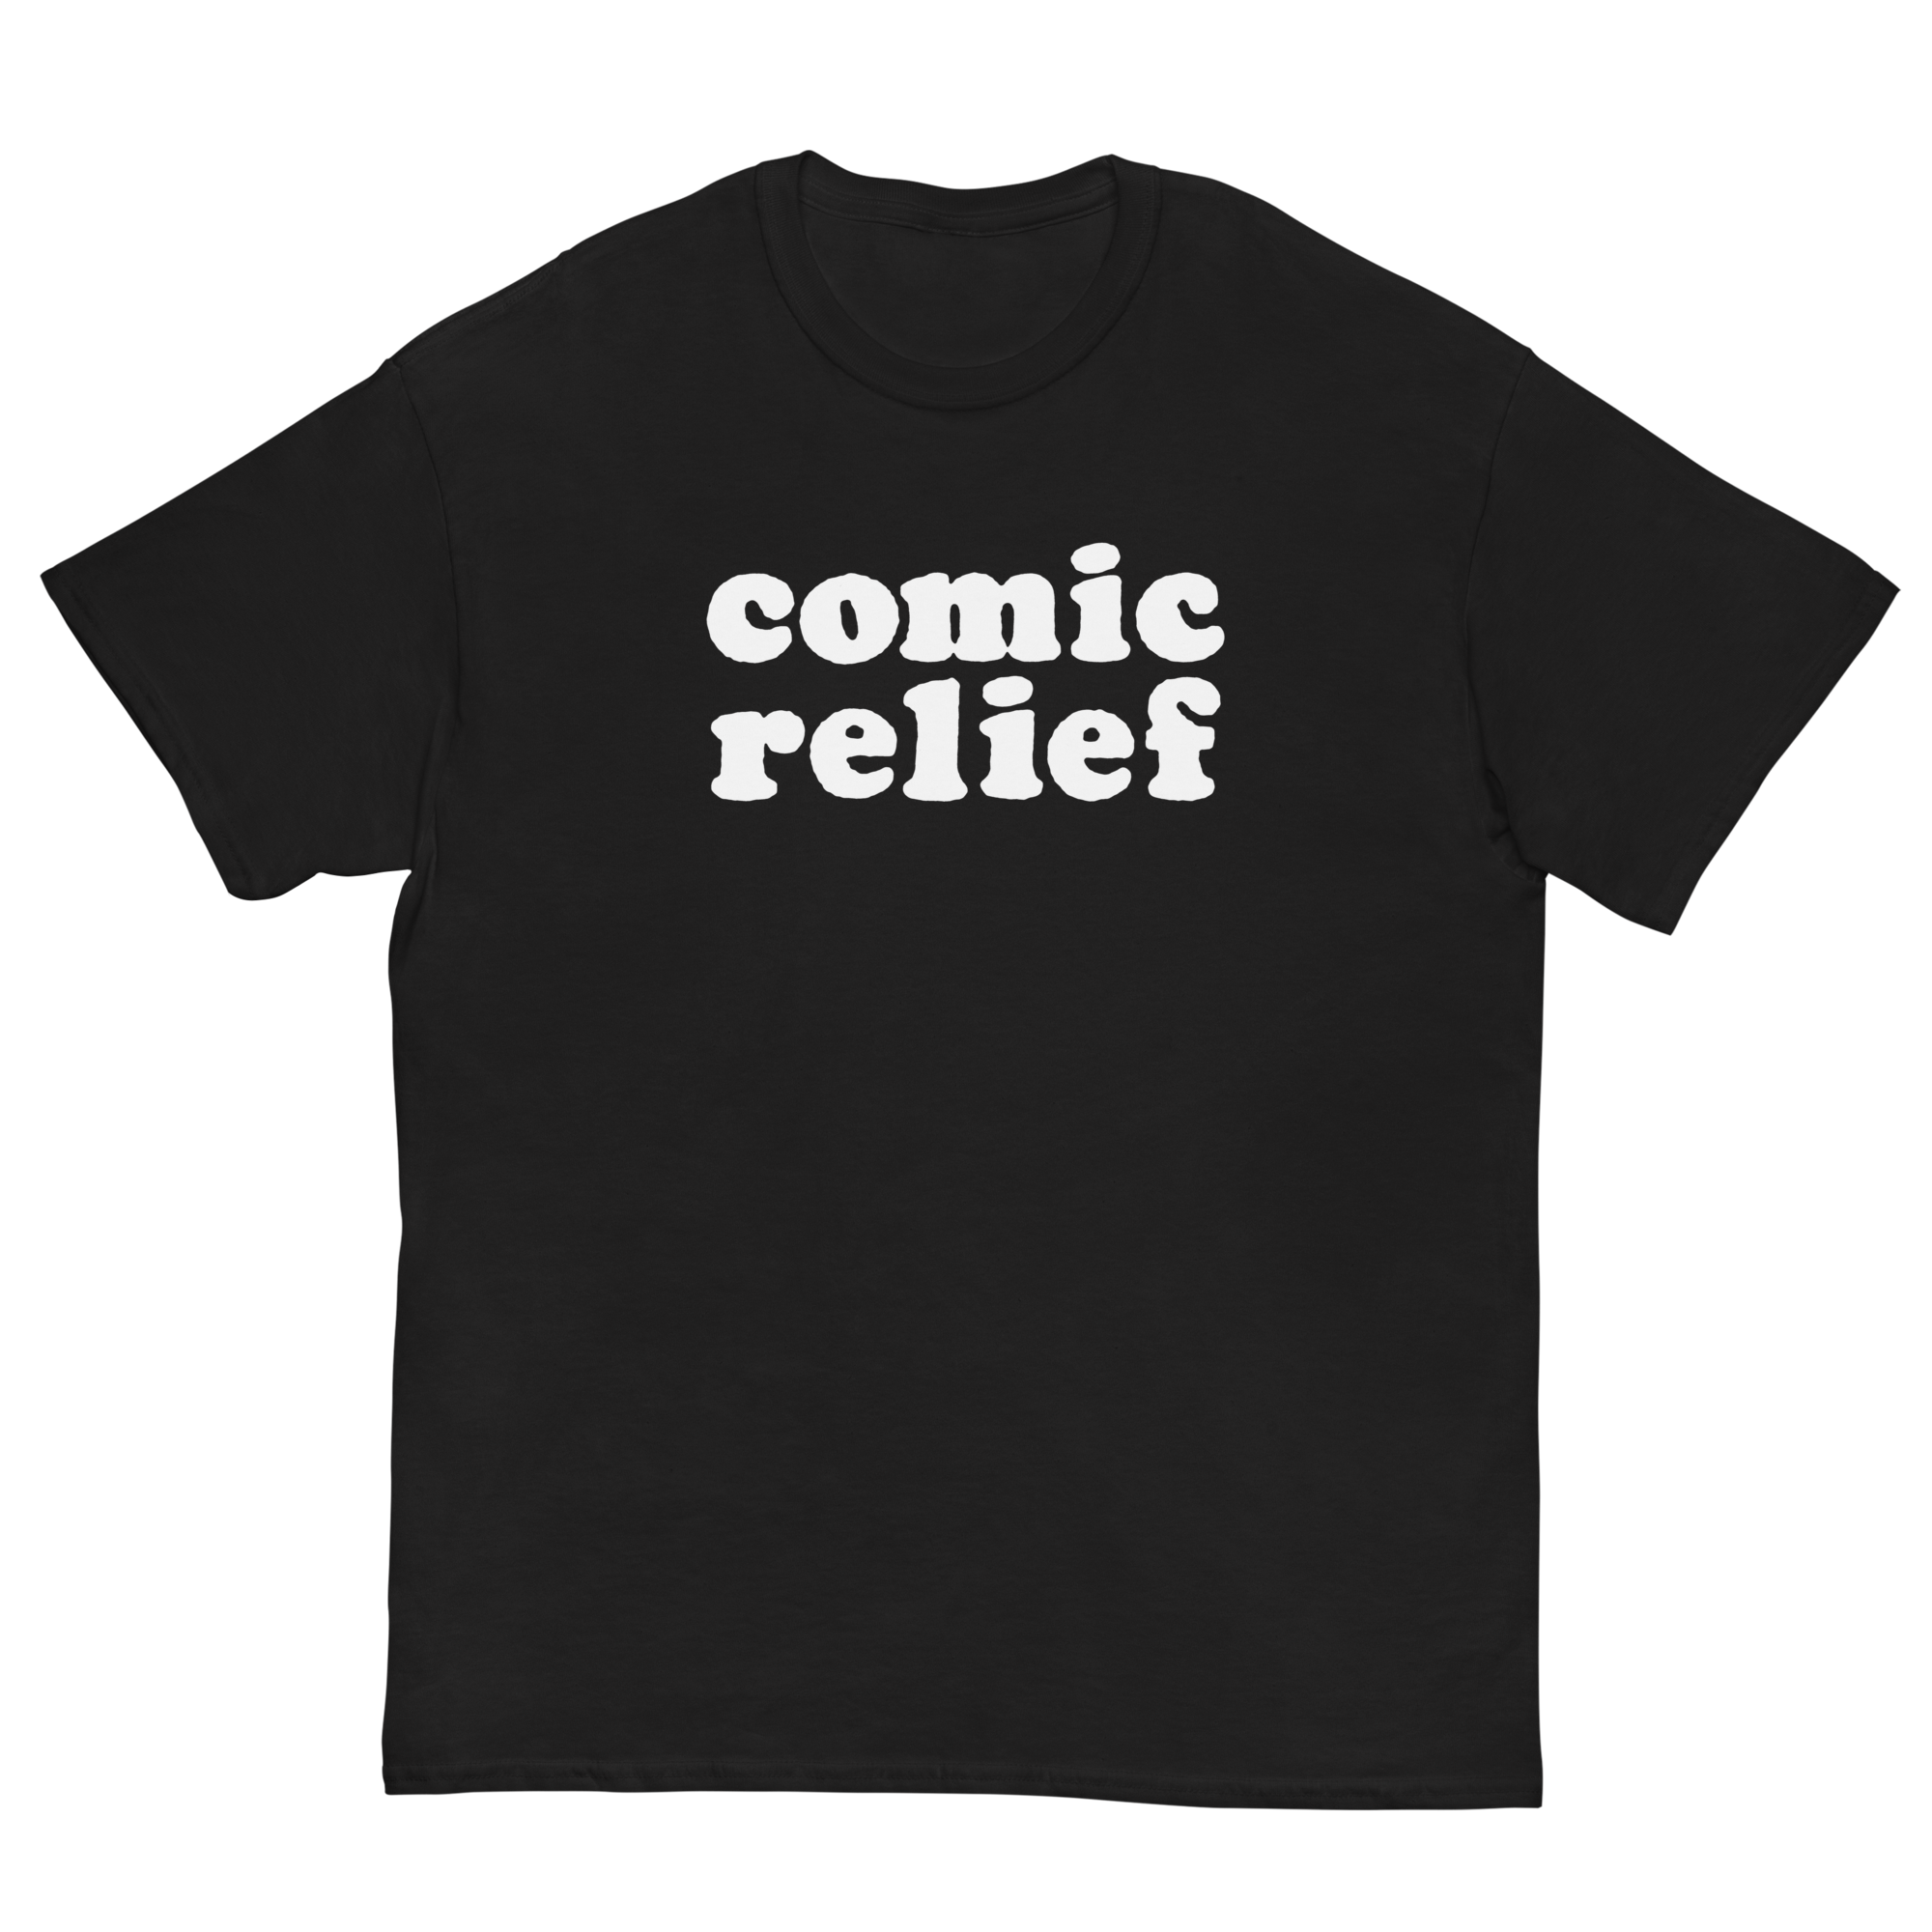 COMIC RELIEF T-SHIRT